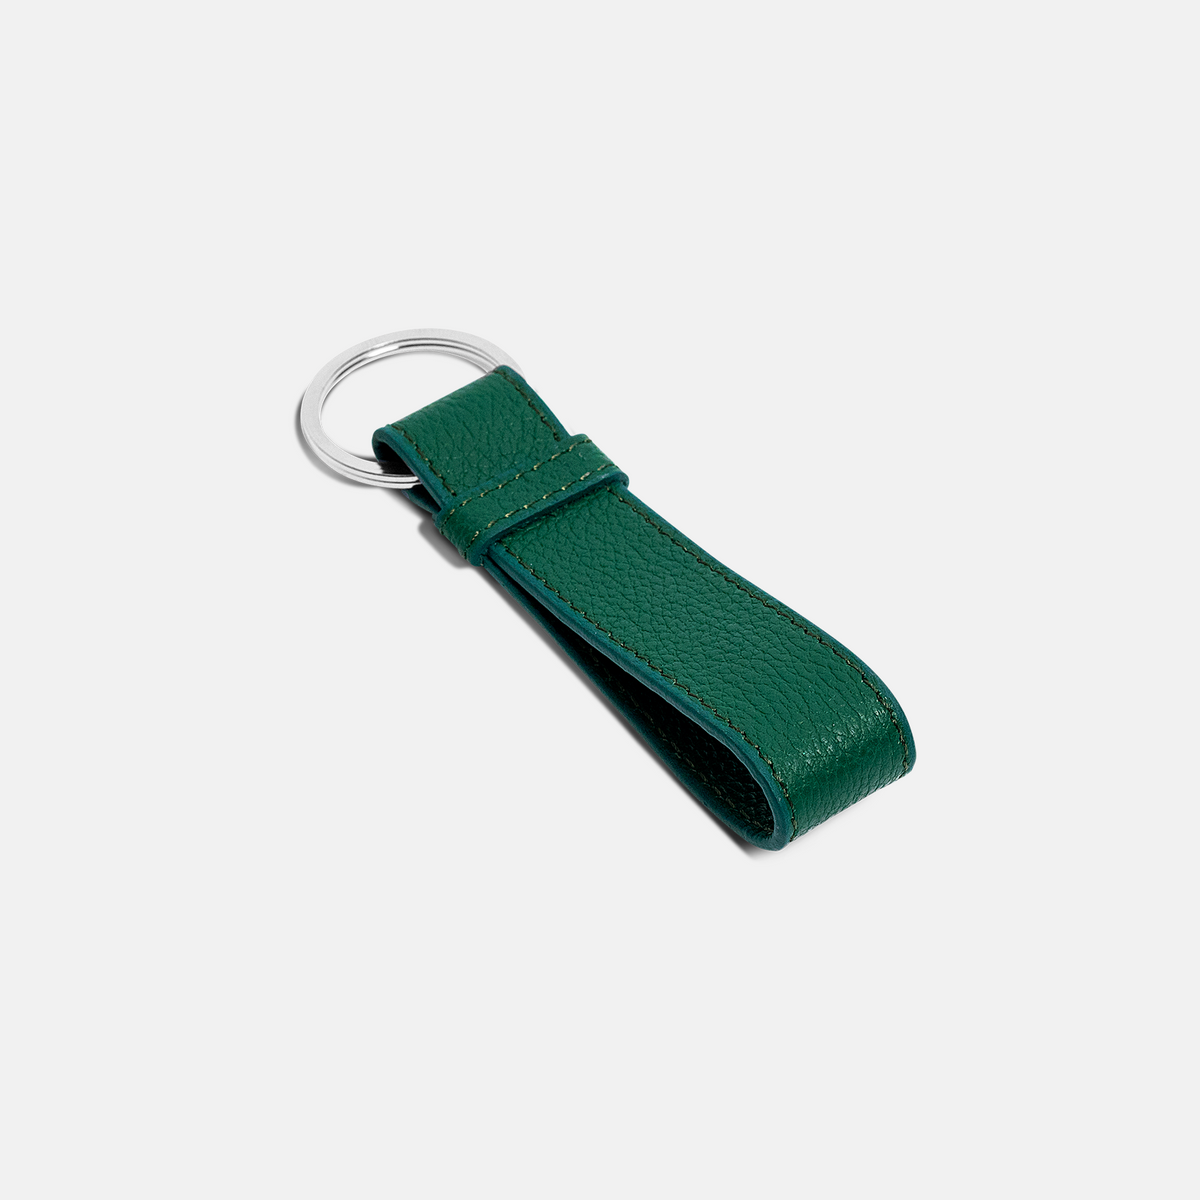 Classic Keychain - Forest Green 